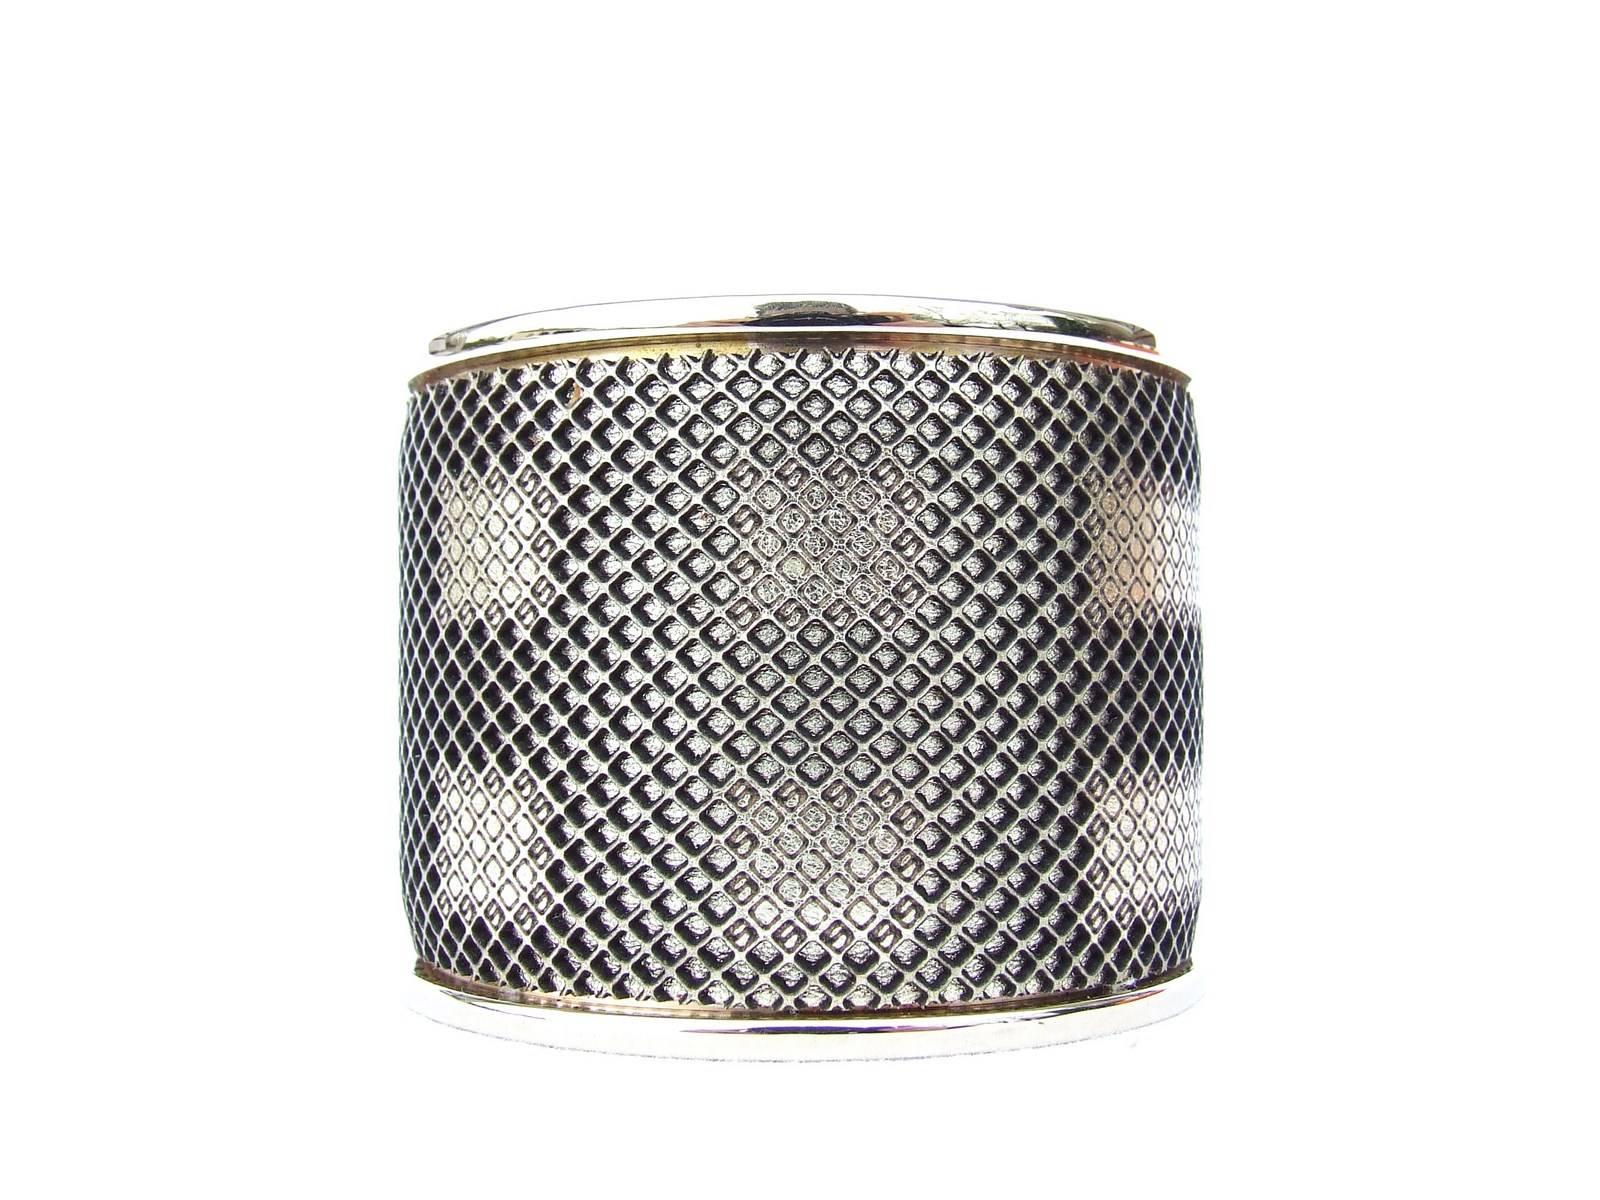 Stunning and so rare Authentic Burberry Cuff

Made of metal

Colorway: Black and Gold

The pattern is like a honeycomb, with some alveoli filled with golden to draw a check pattern. Beautiful !

